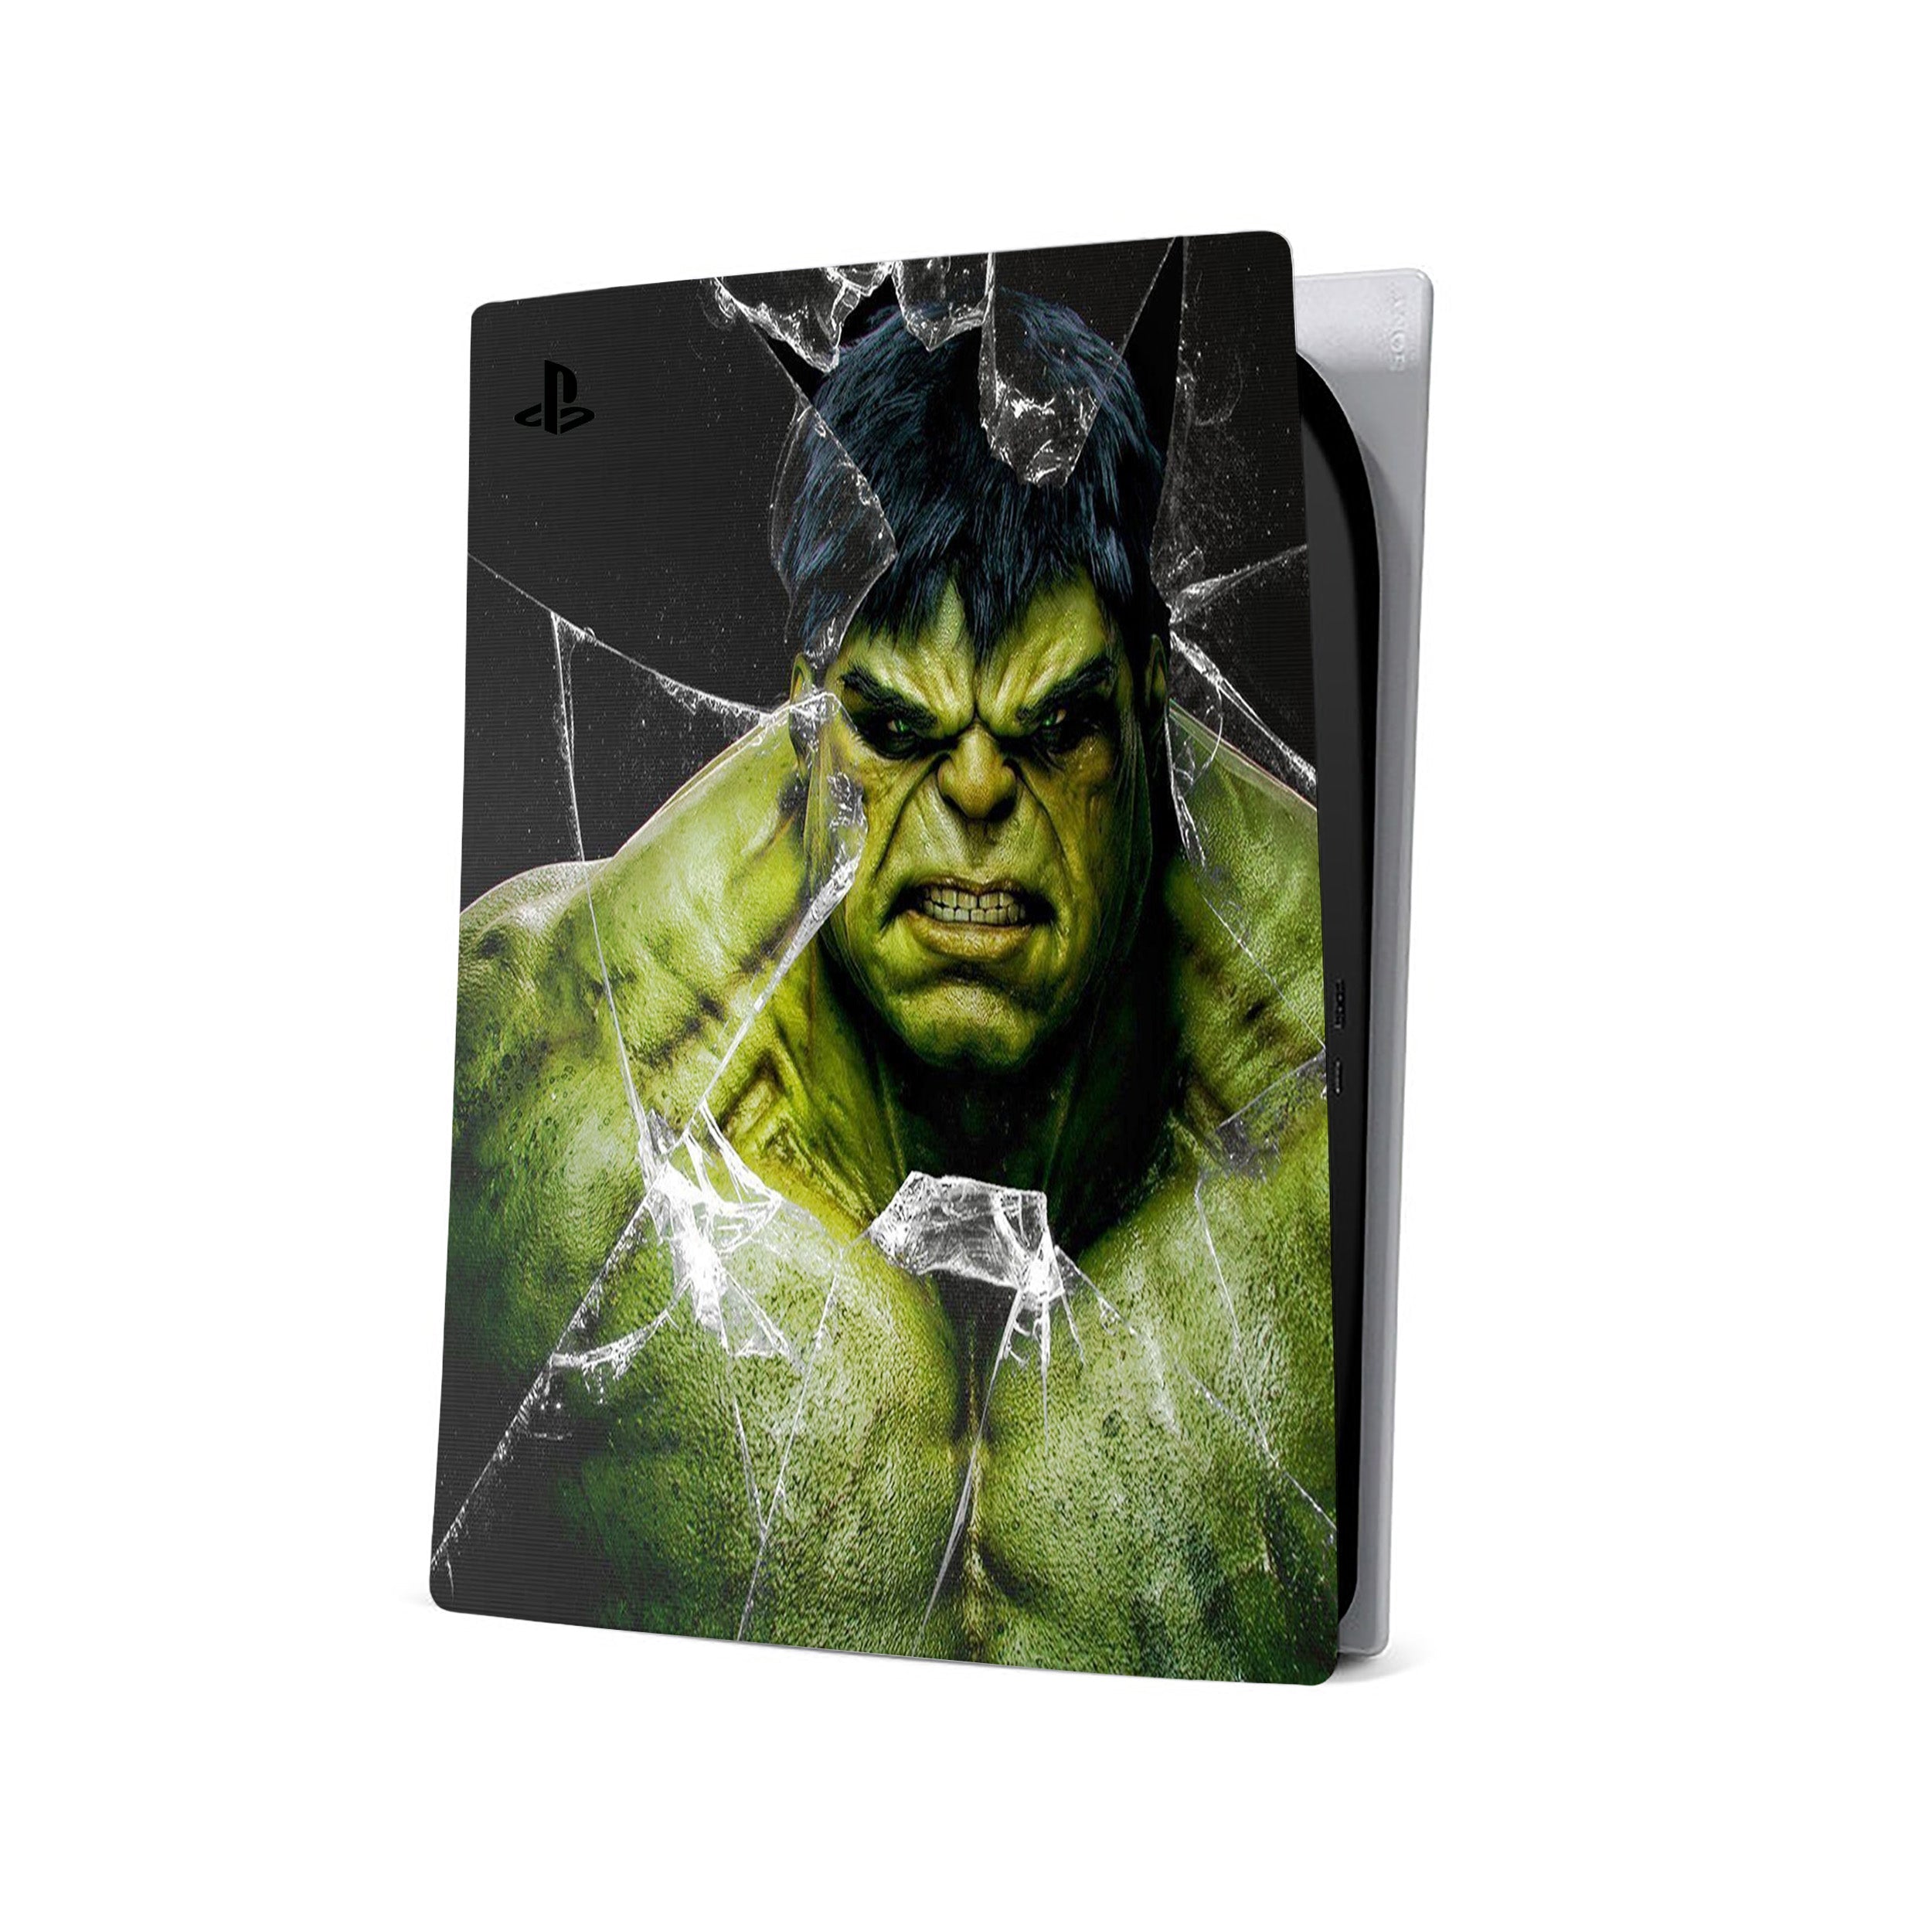 A video game skin featuring a Marvel Hulk design for the PS5.